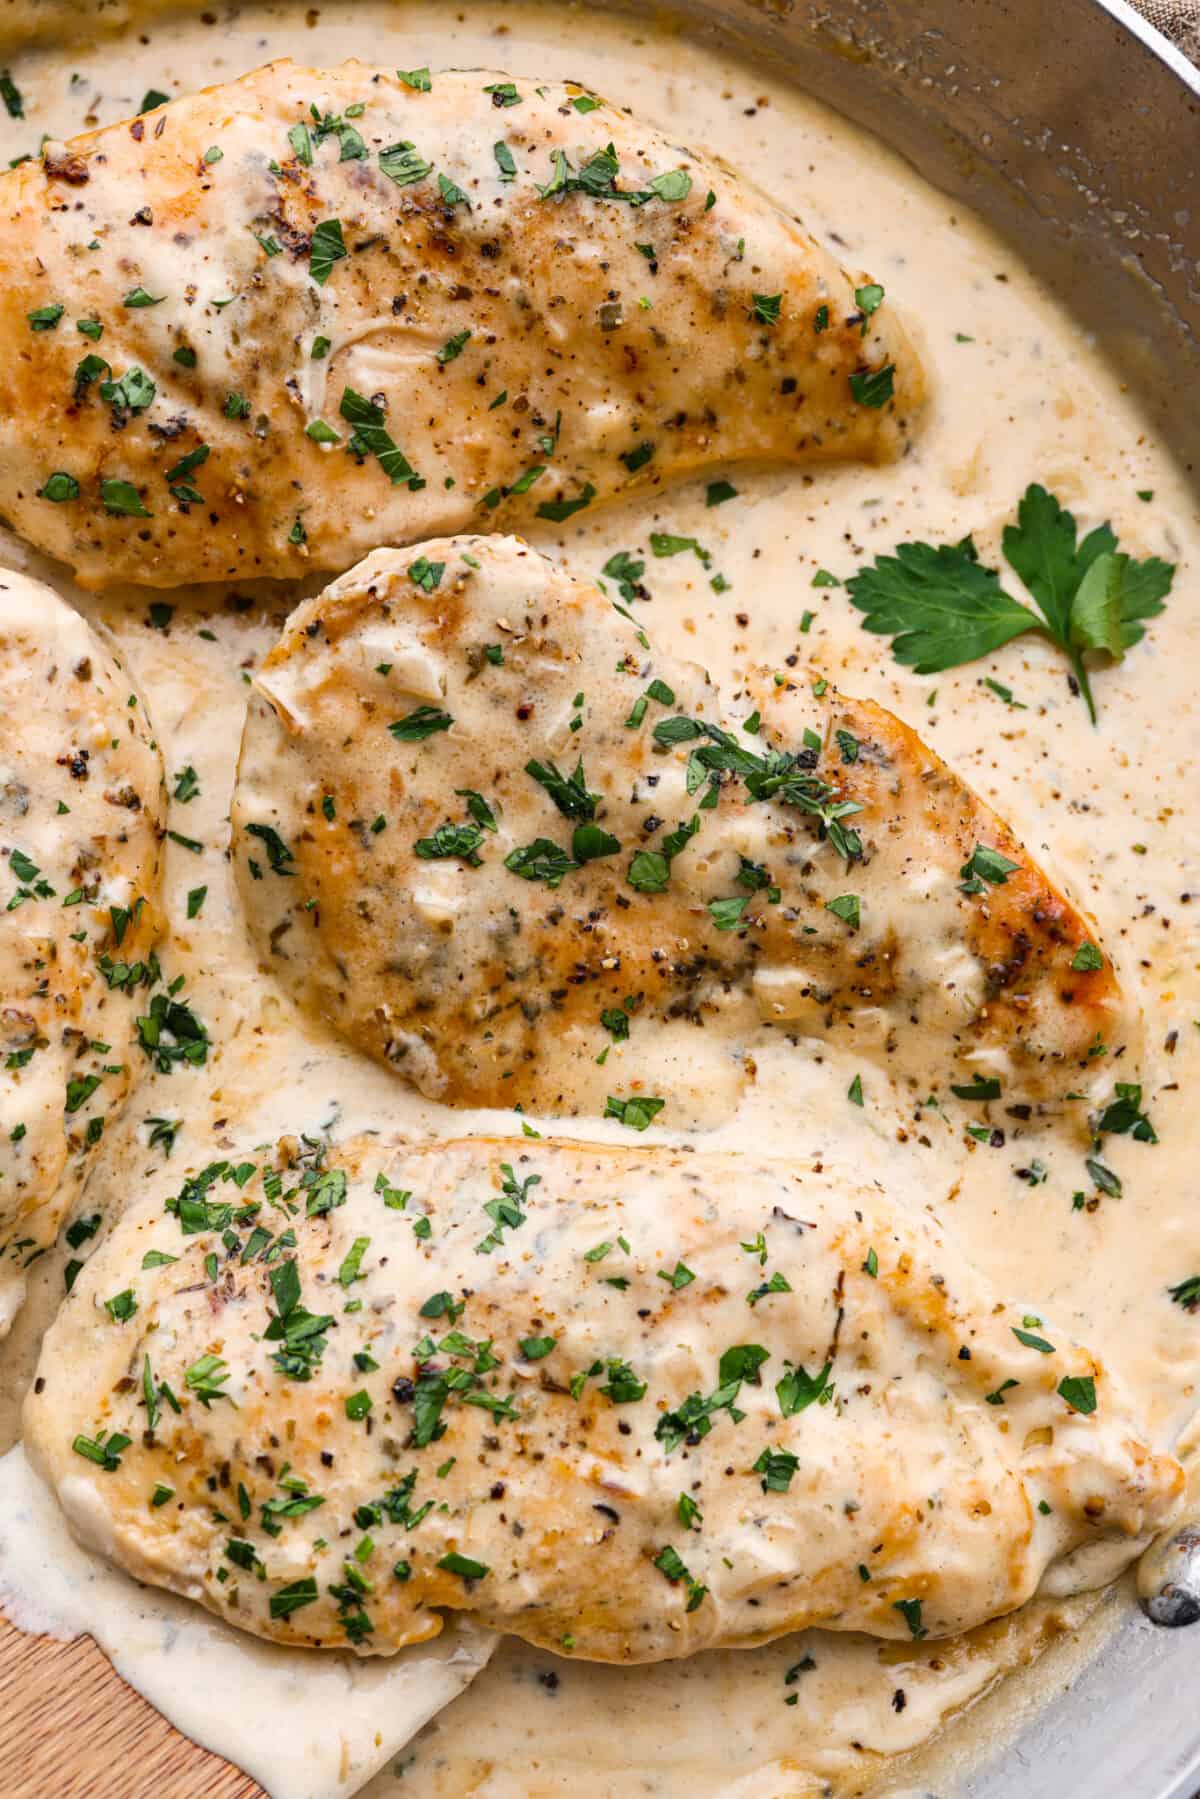 Closeup of 3 cooked chicken breasts, covered in a creamy sauce and topped with fresh herbs.